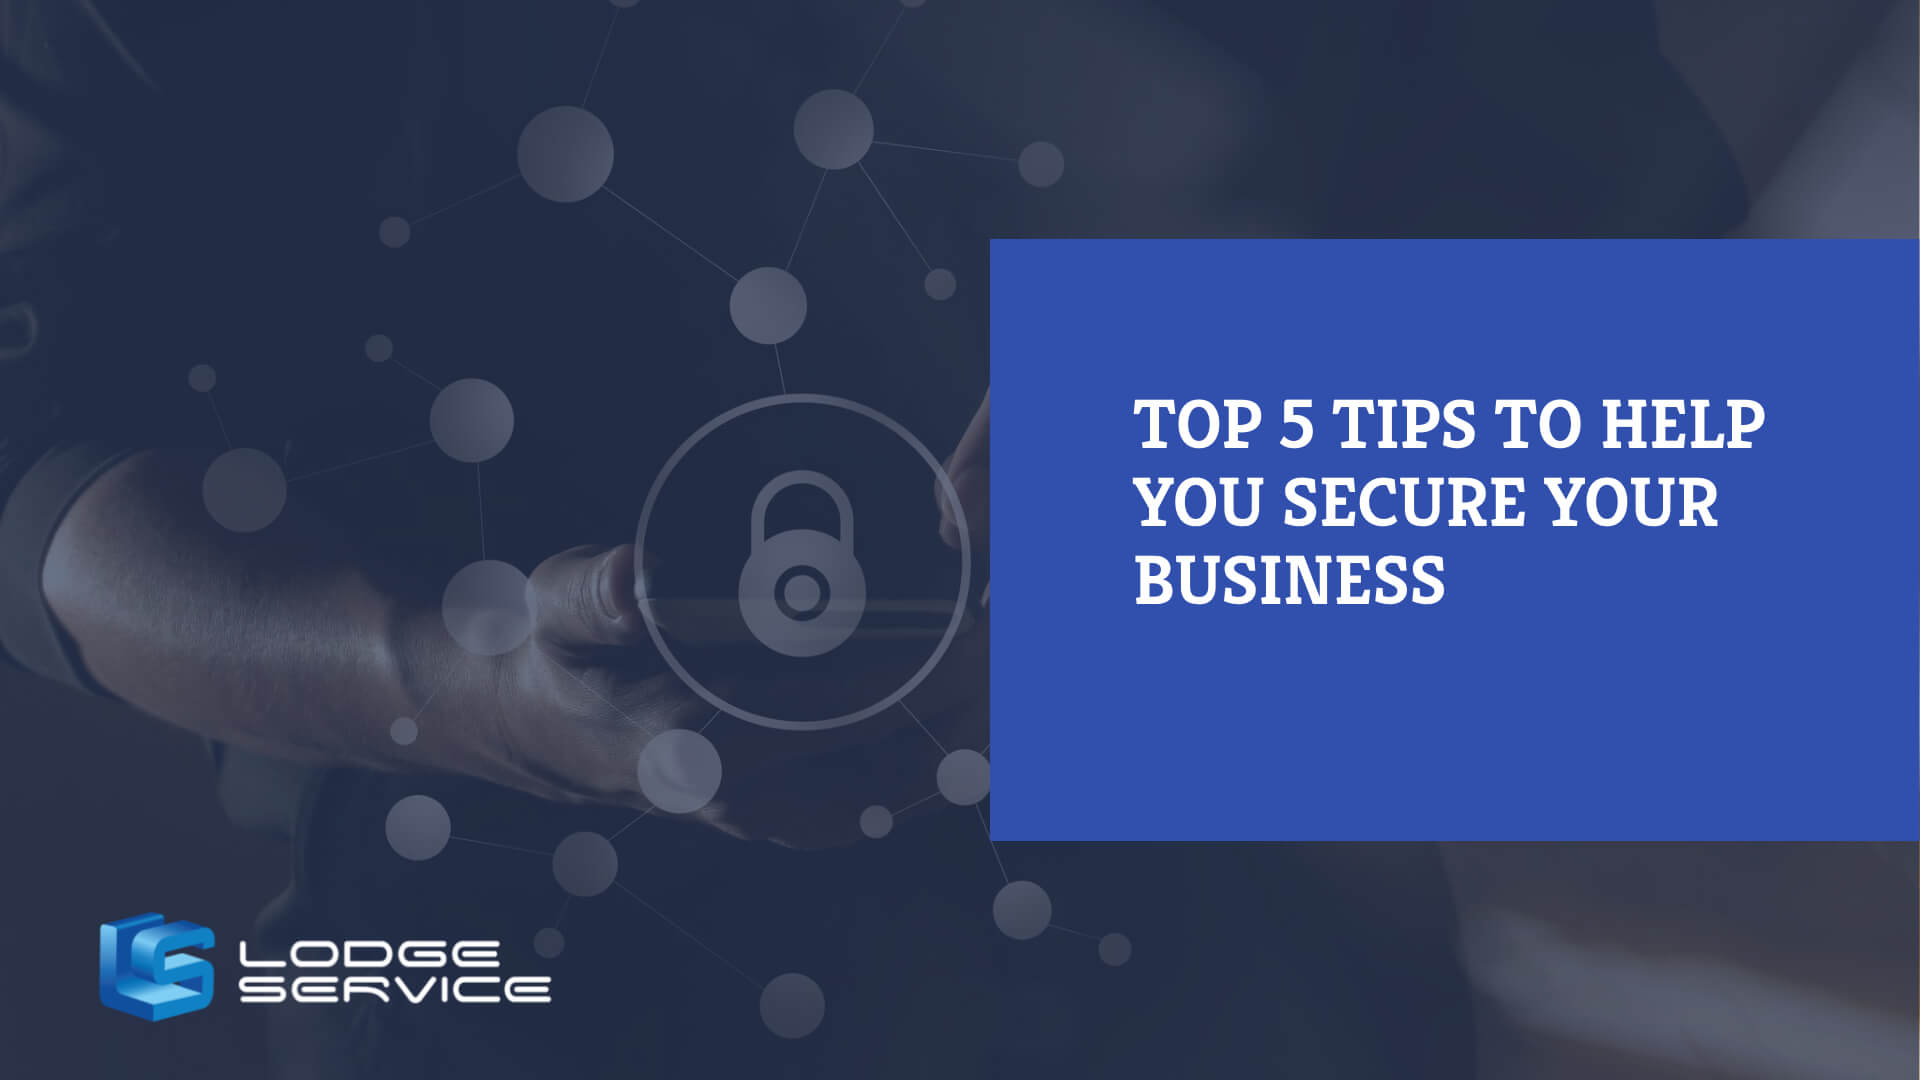 Top 5 tips to help you secure your business